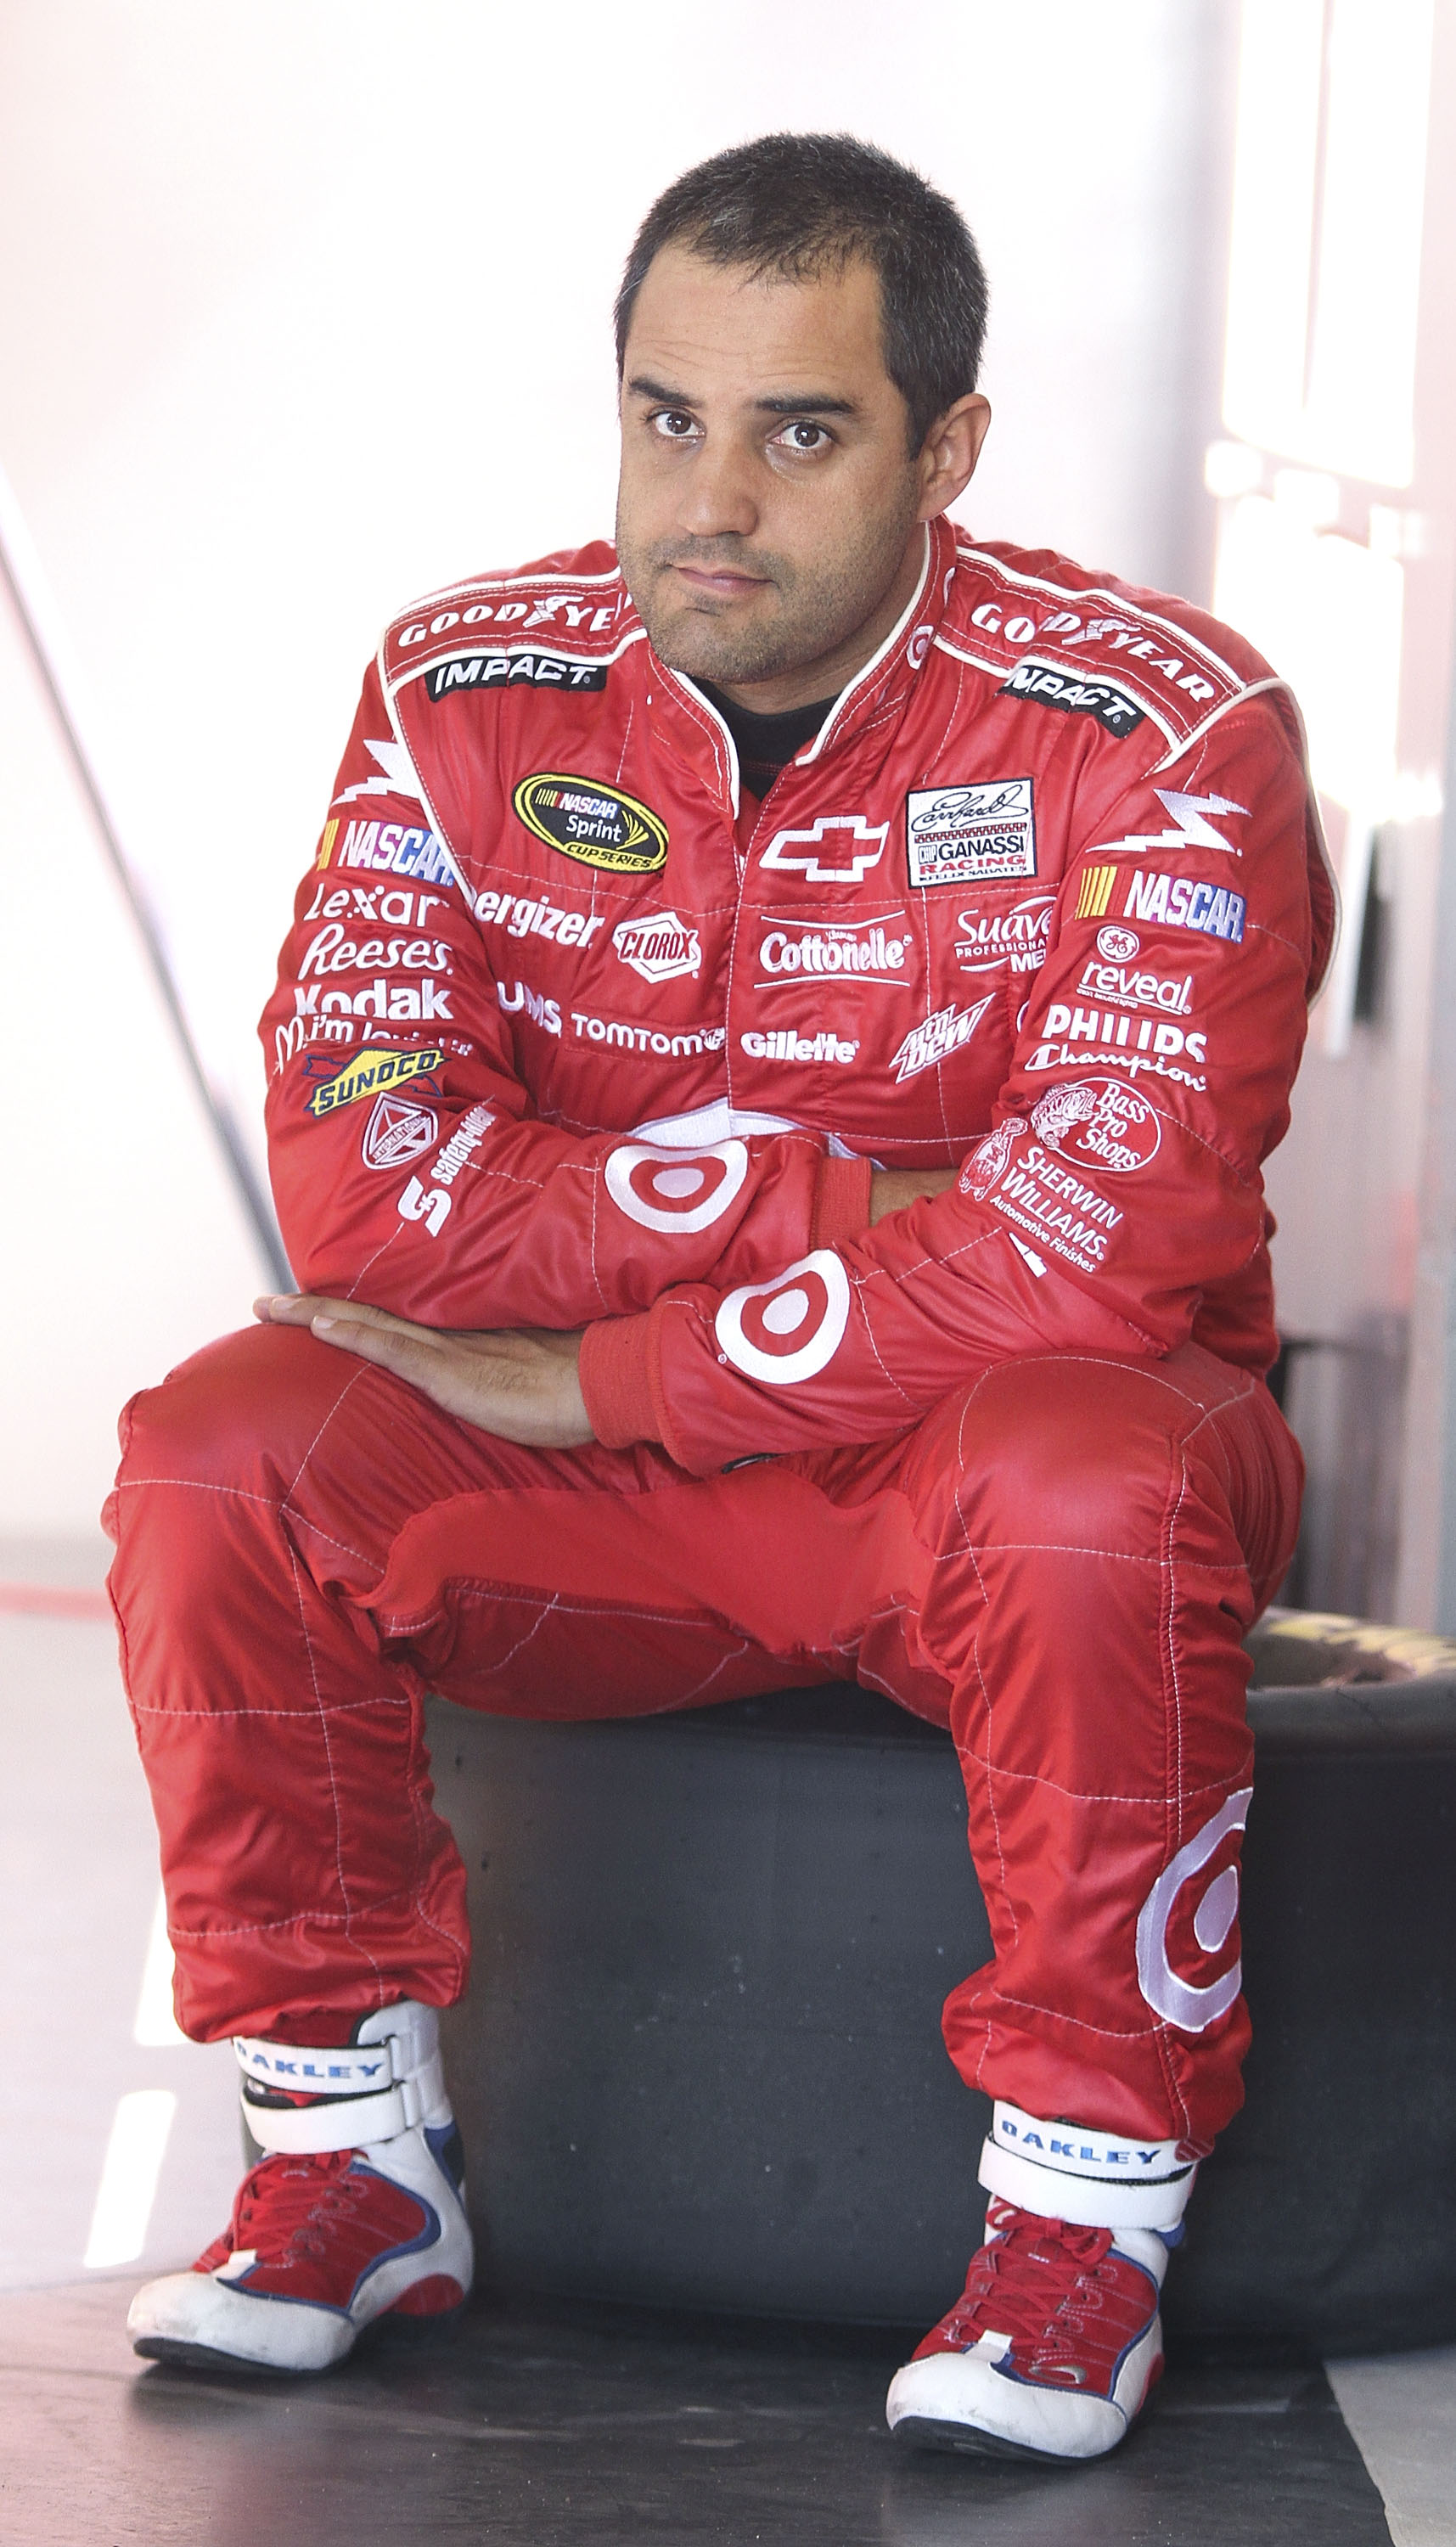 Juan Montoya is eager to get his 2011 season started.